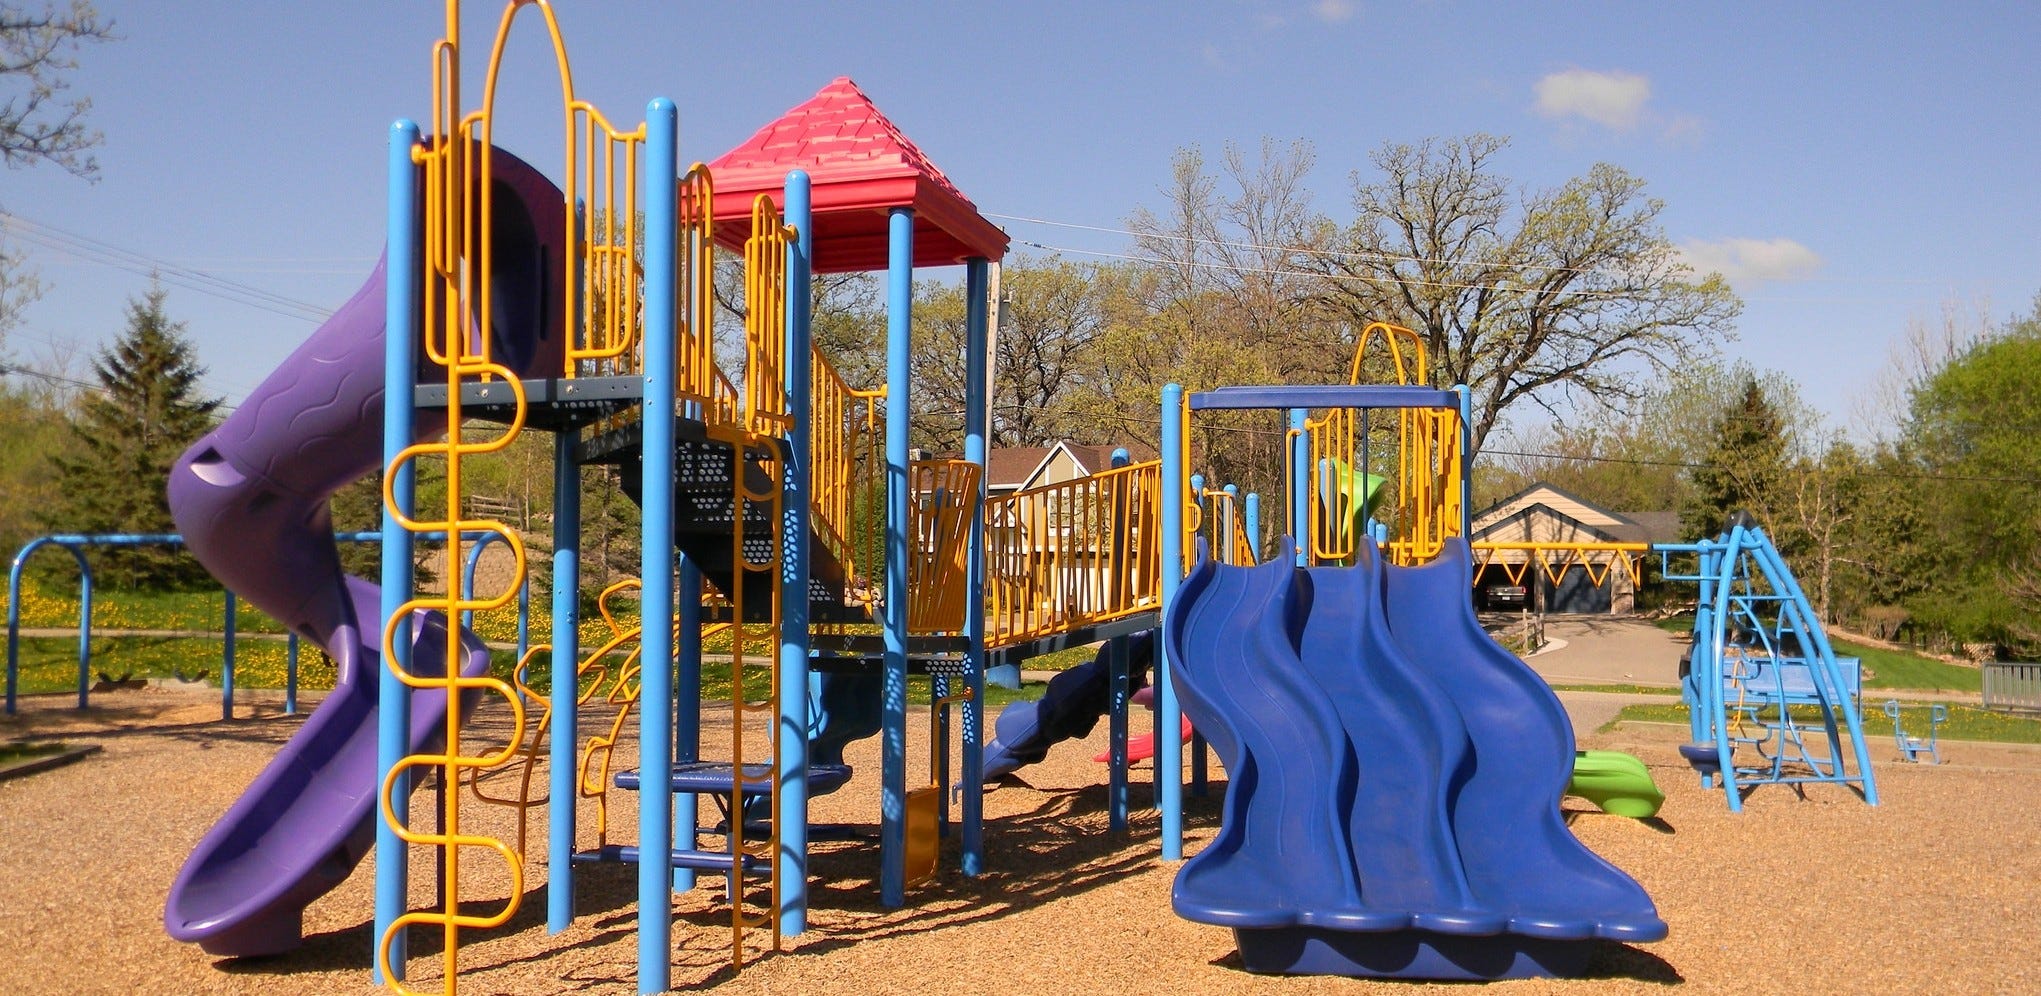 GameTime Adds More Green to Minnesota Park